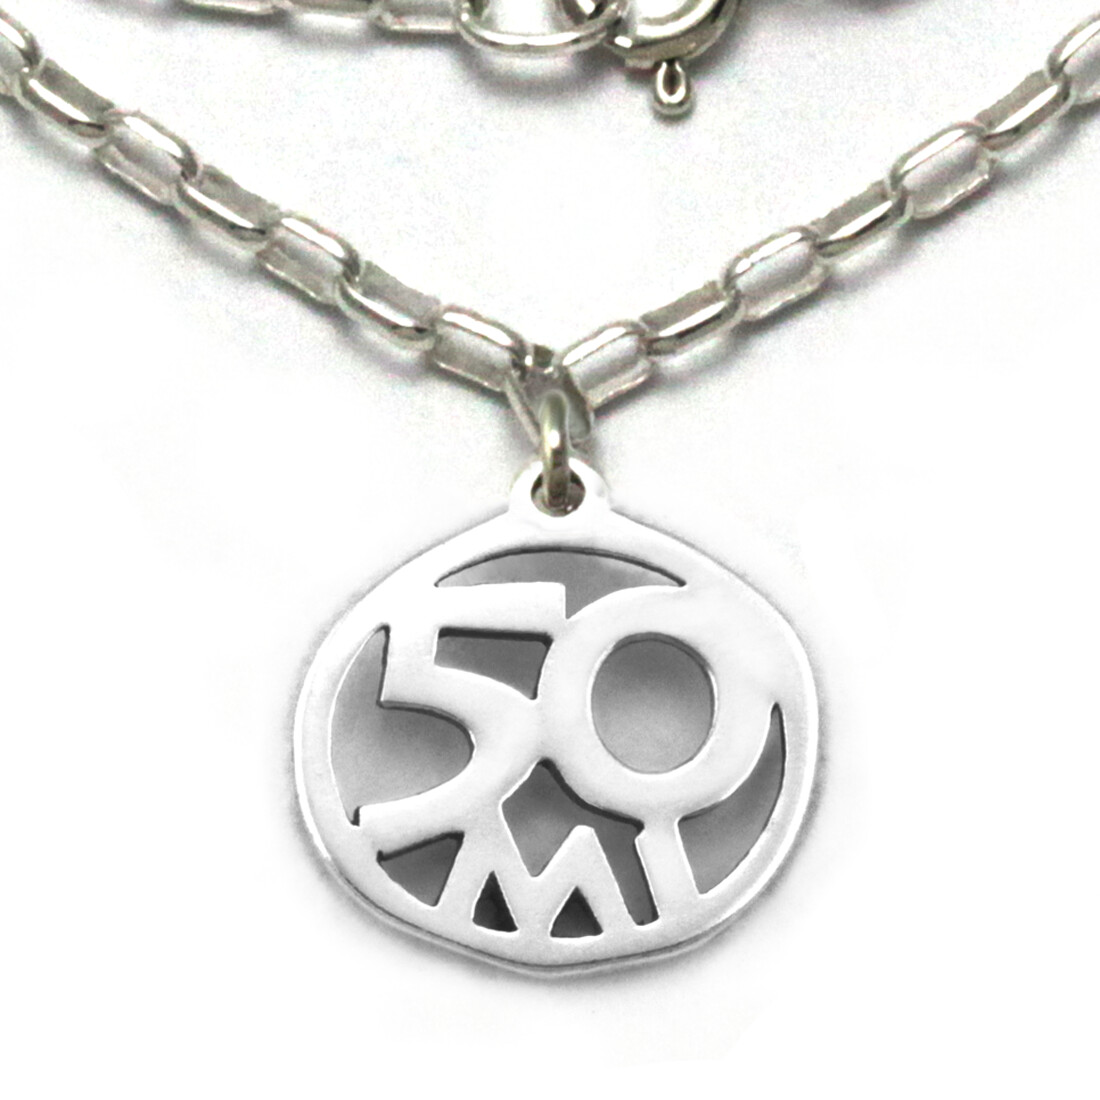 50 Mile Necklace Sterling Silver